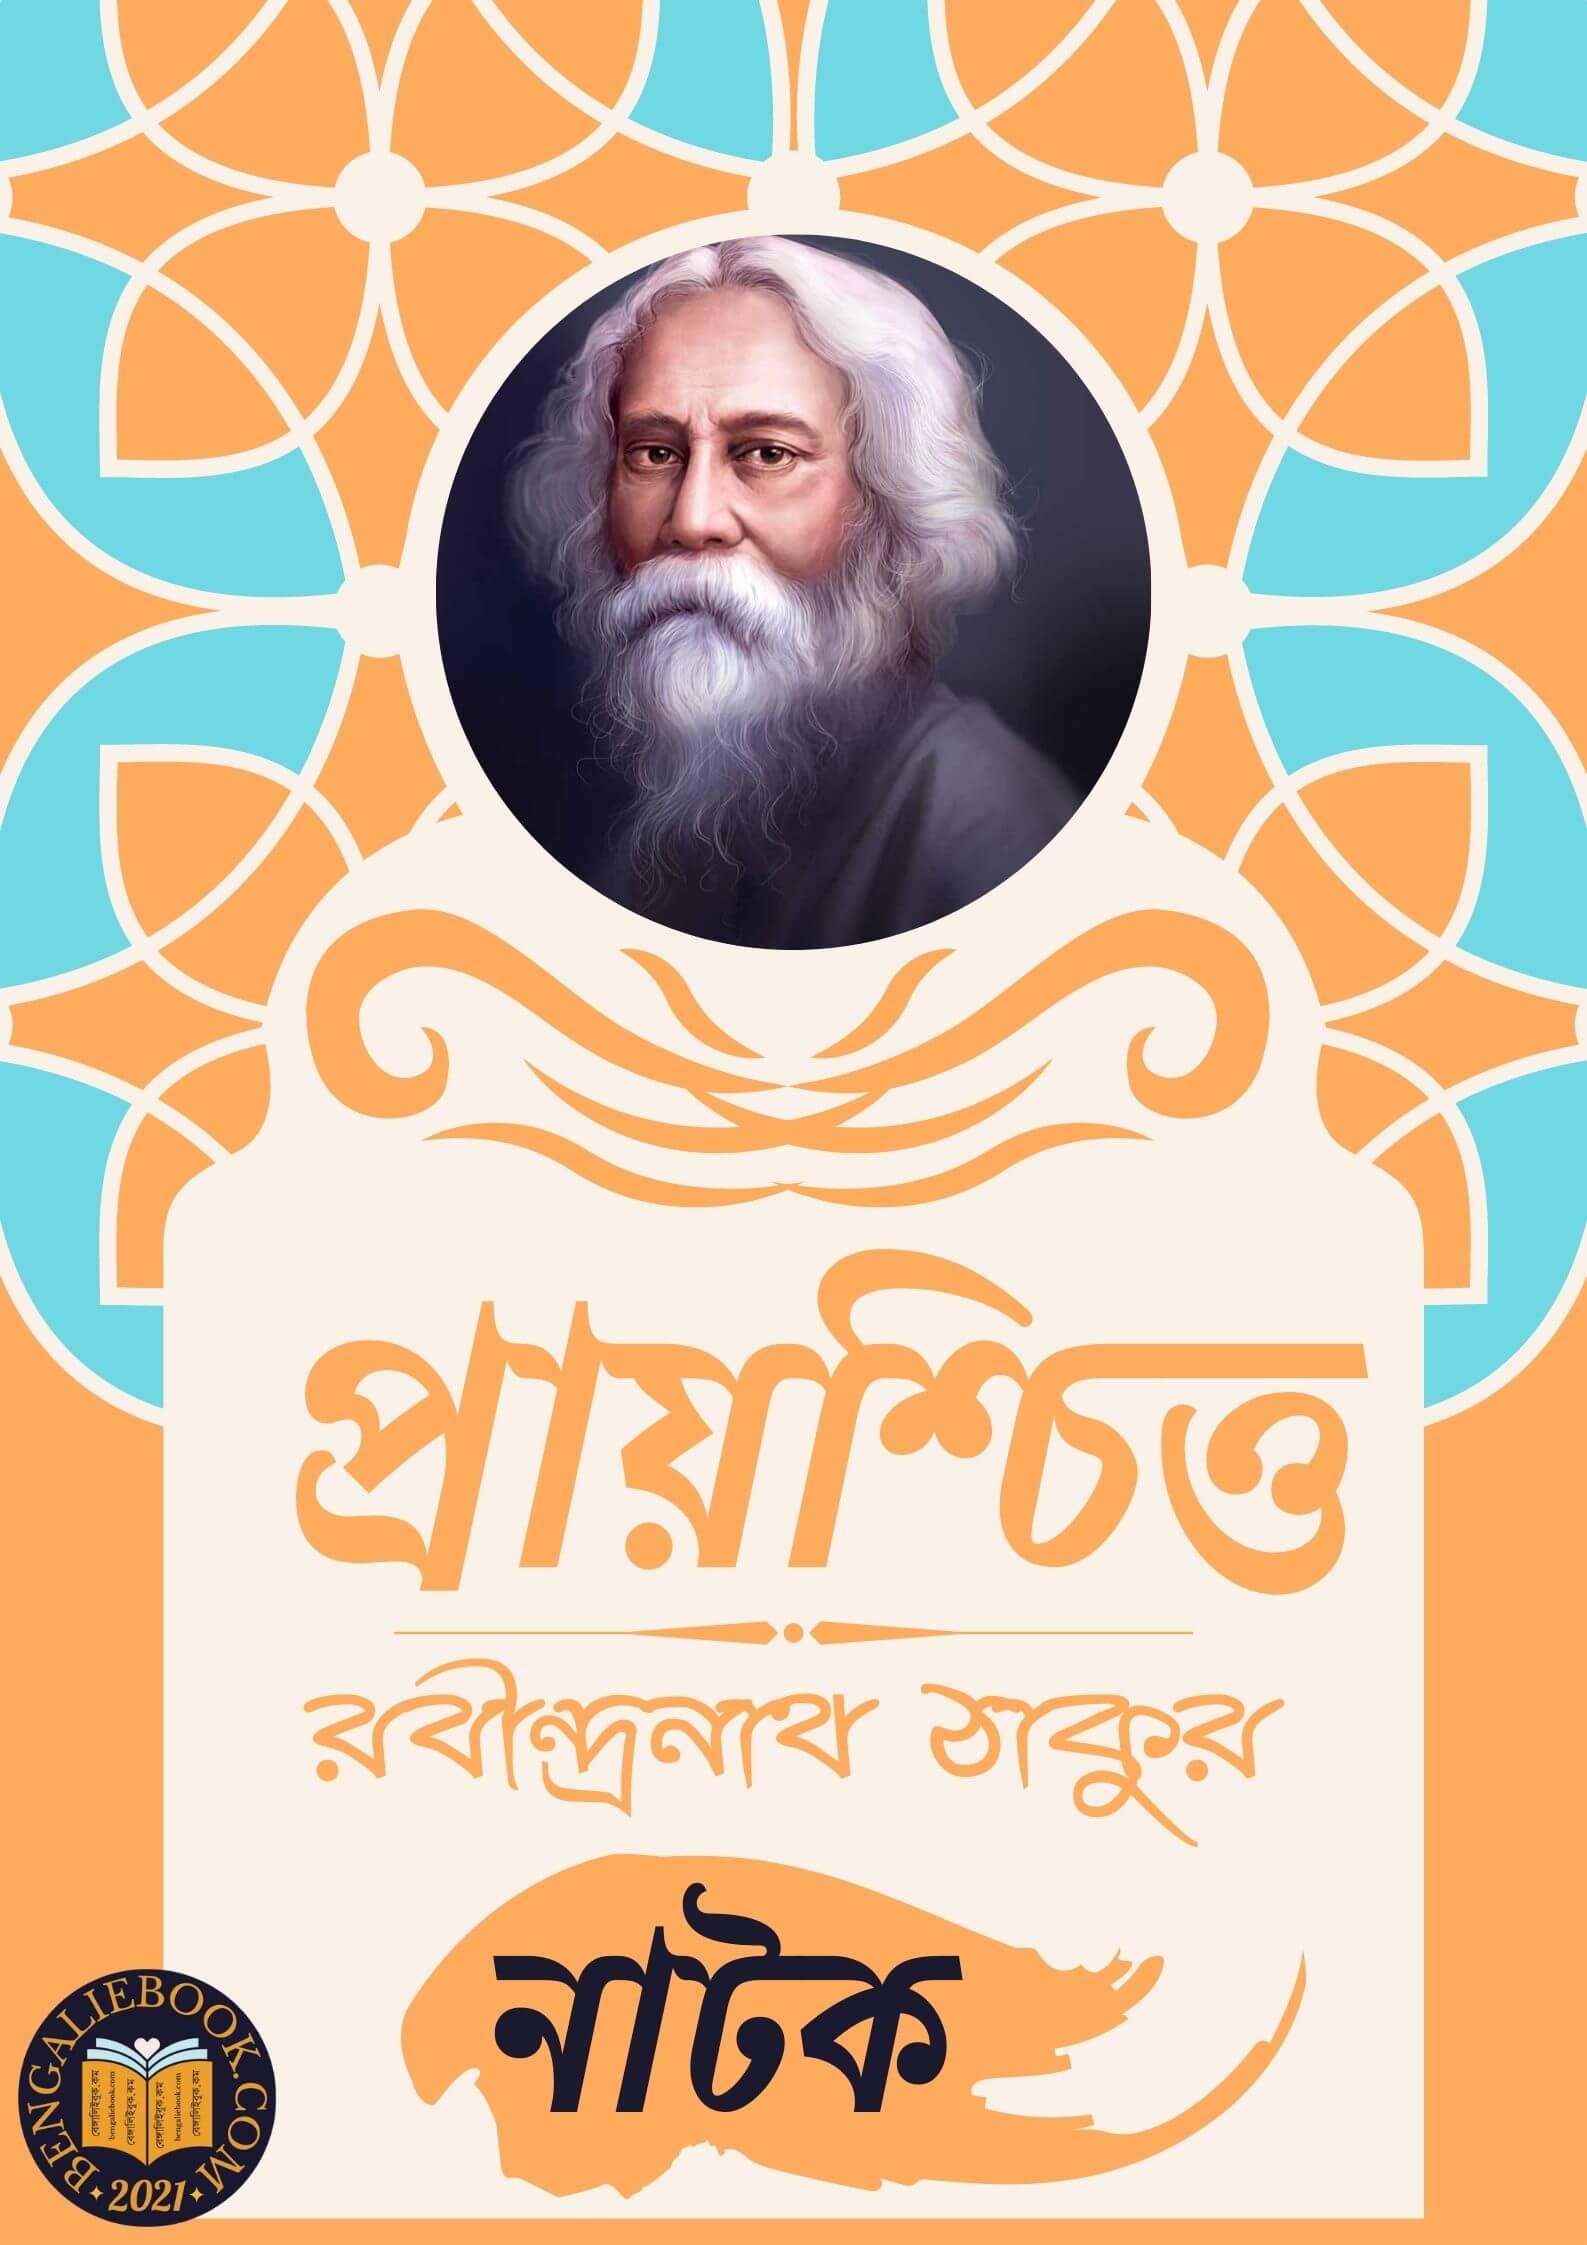 Read more about the article প্রায়শ্চিত্ত-রবীন্দ্রনাথ ঠাকুর (Prashchitto by Rabindranath Tagore)